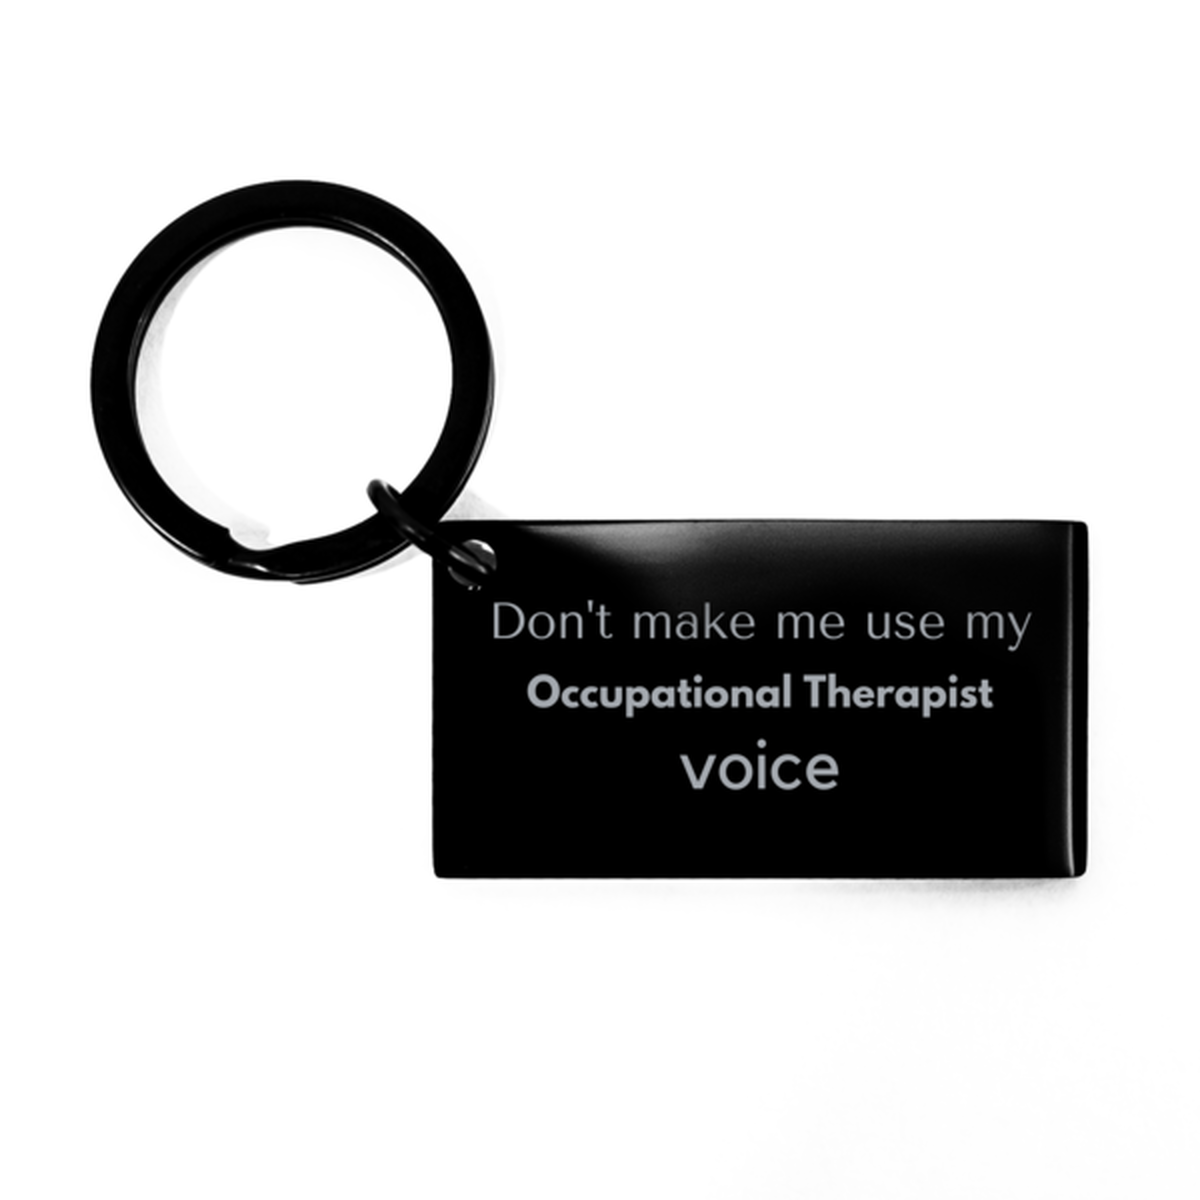 Don't make me use my Occupational Therapist voice, Sarcasm Occupational Therapist Gifts, Christmas Occupational Therapist Keychain Birthday Unique Gifts For Occupational Therapist Coworkers, Men, Women, Colleague, Friends